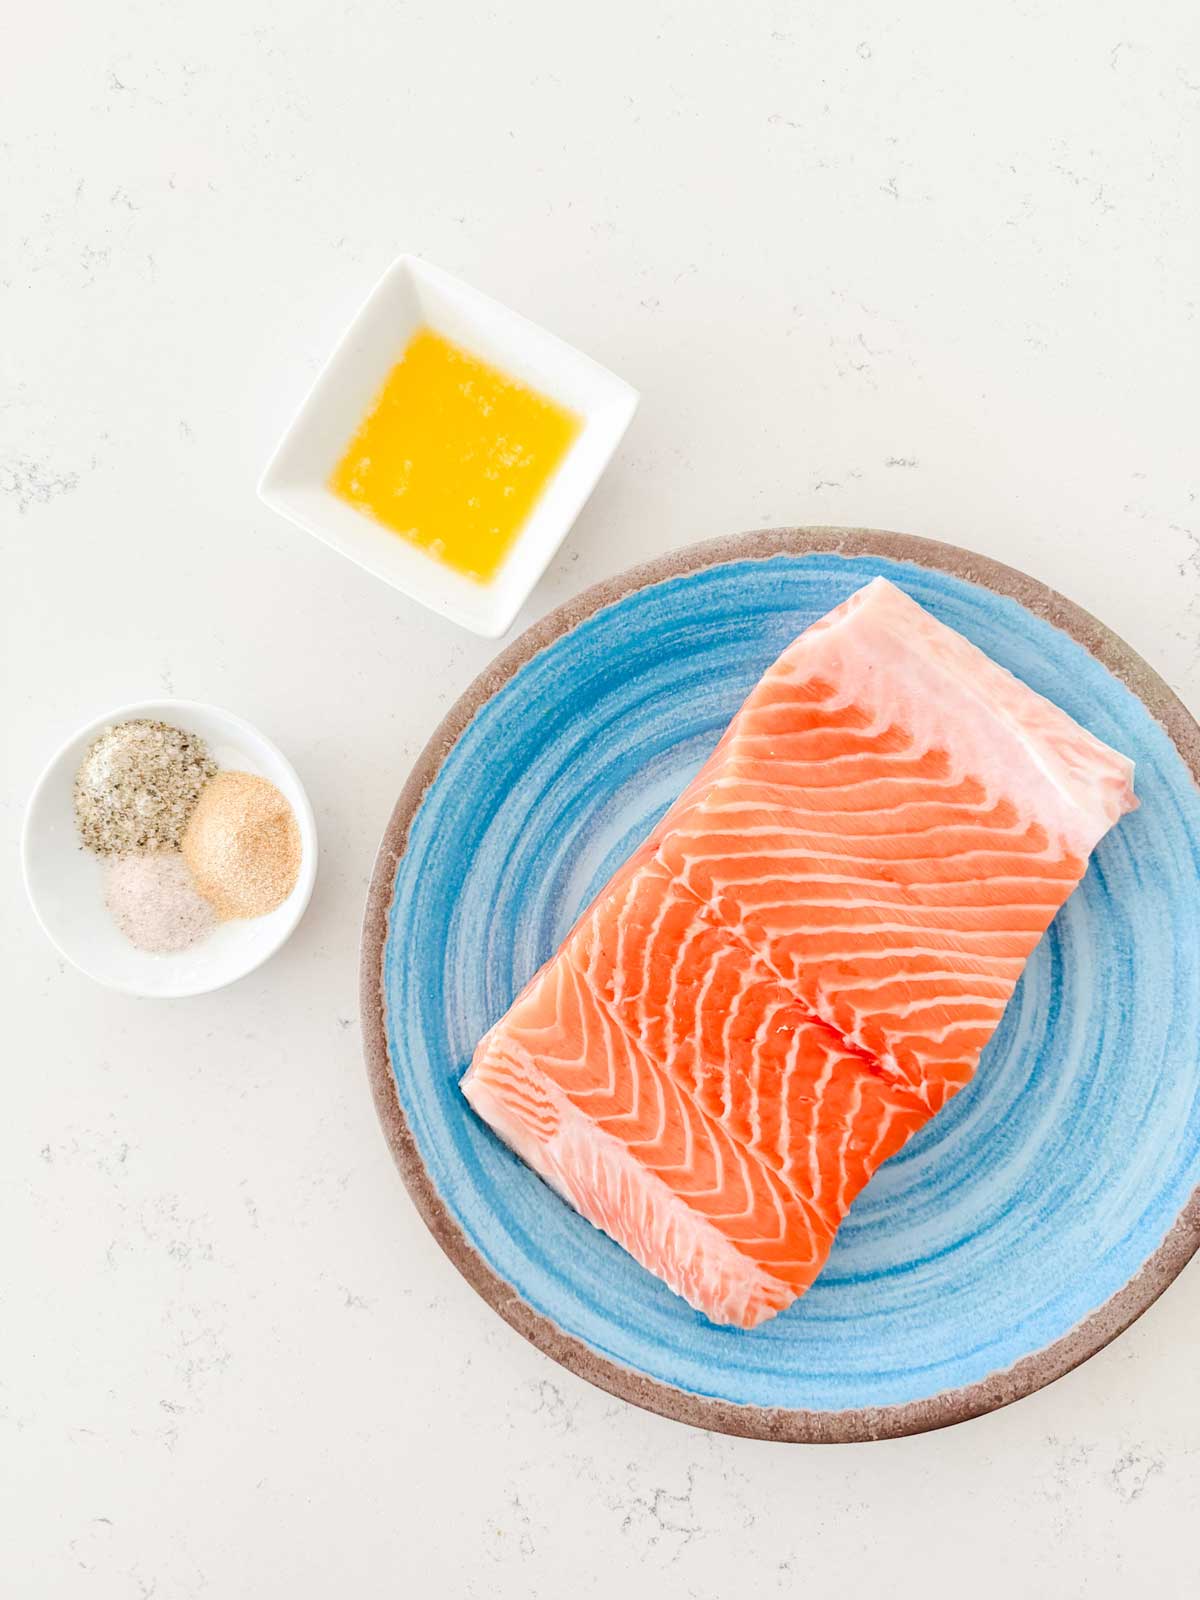 Overhead photo of a salmon fillet, oil, and seasonings.